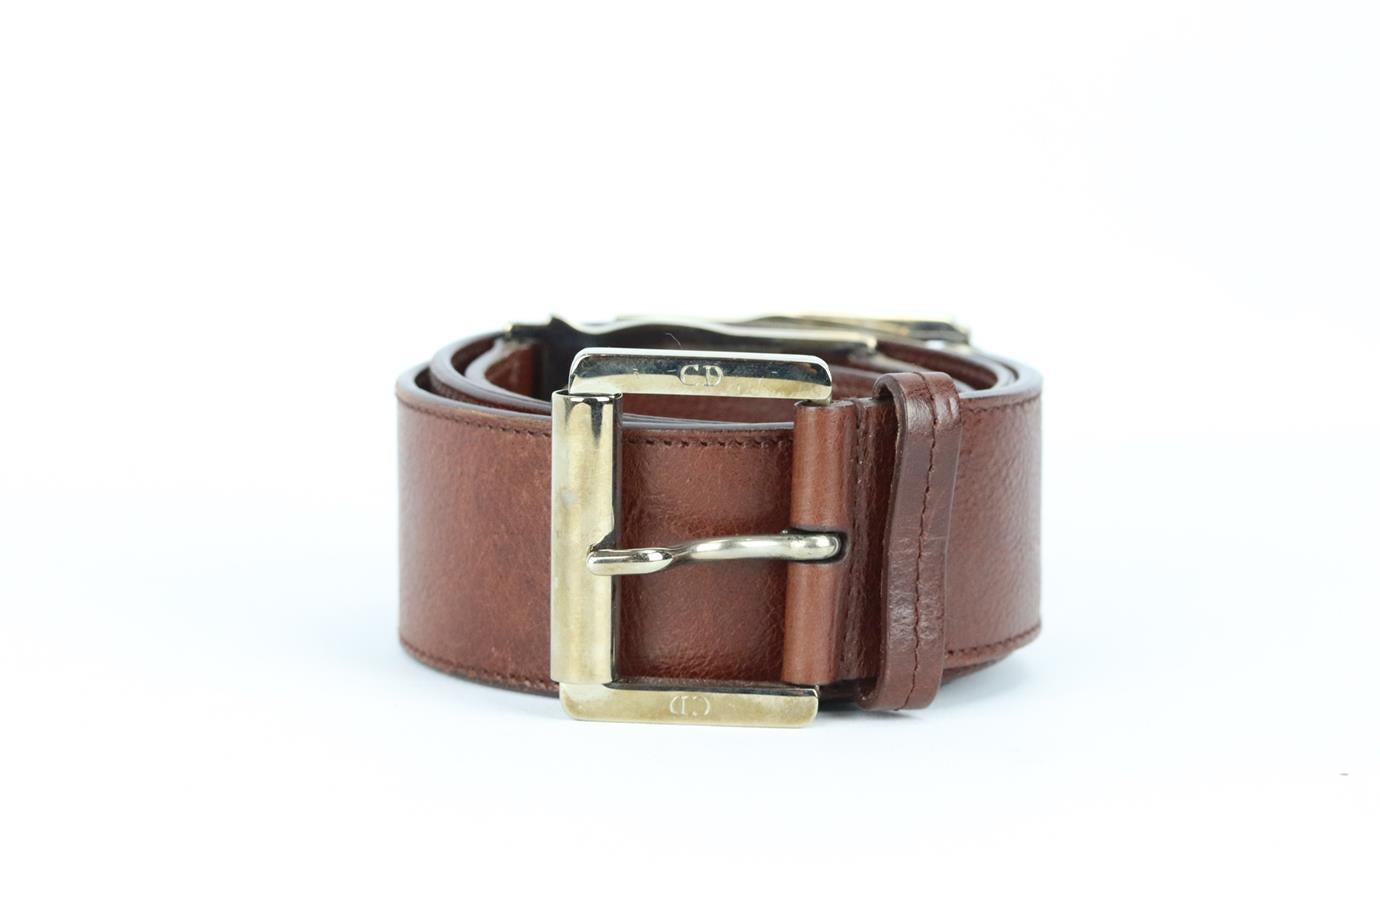 Christian Dior 2005 CD leather belt. Brown. Buckle fastening at front. 100% Leather. Does not come with dustbag or box. Size: 85 cm. Min. Length: 33 in. Max. Length: 35 in. Width: 1.5 in. Very good condition - Light signs of wear; see pictures.
